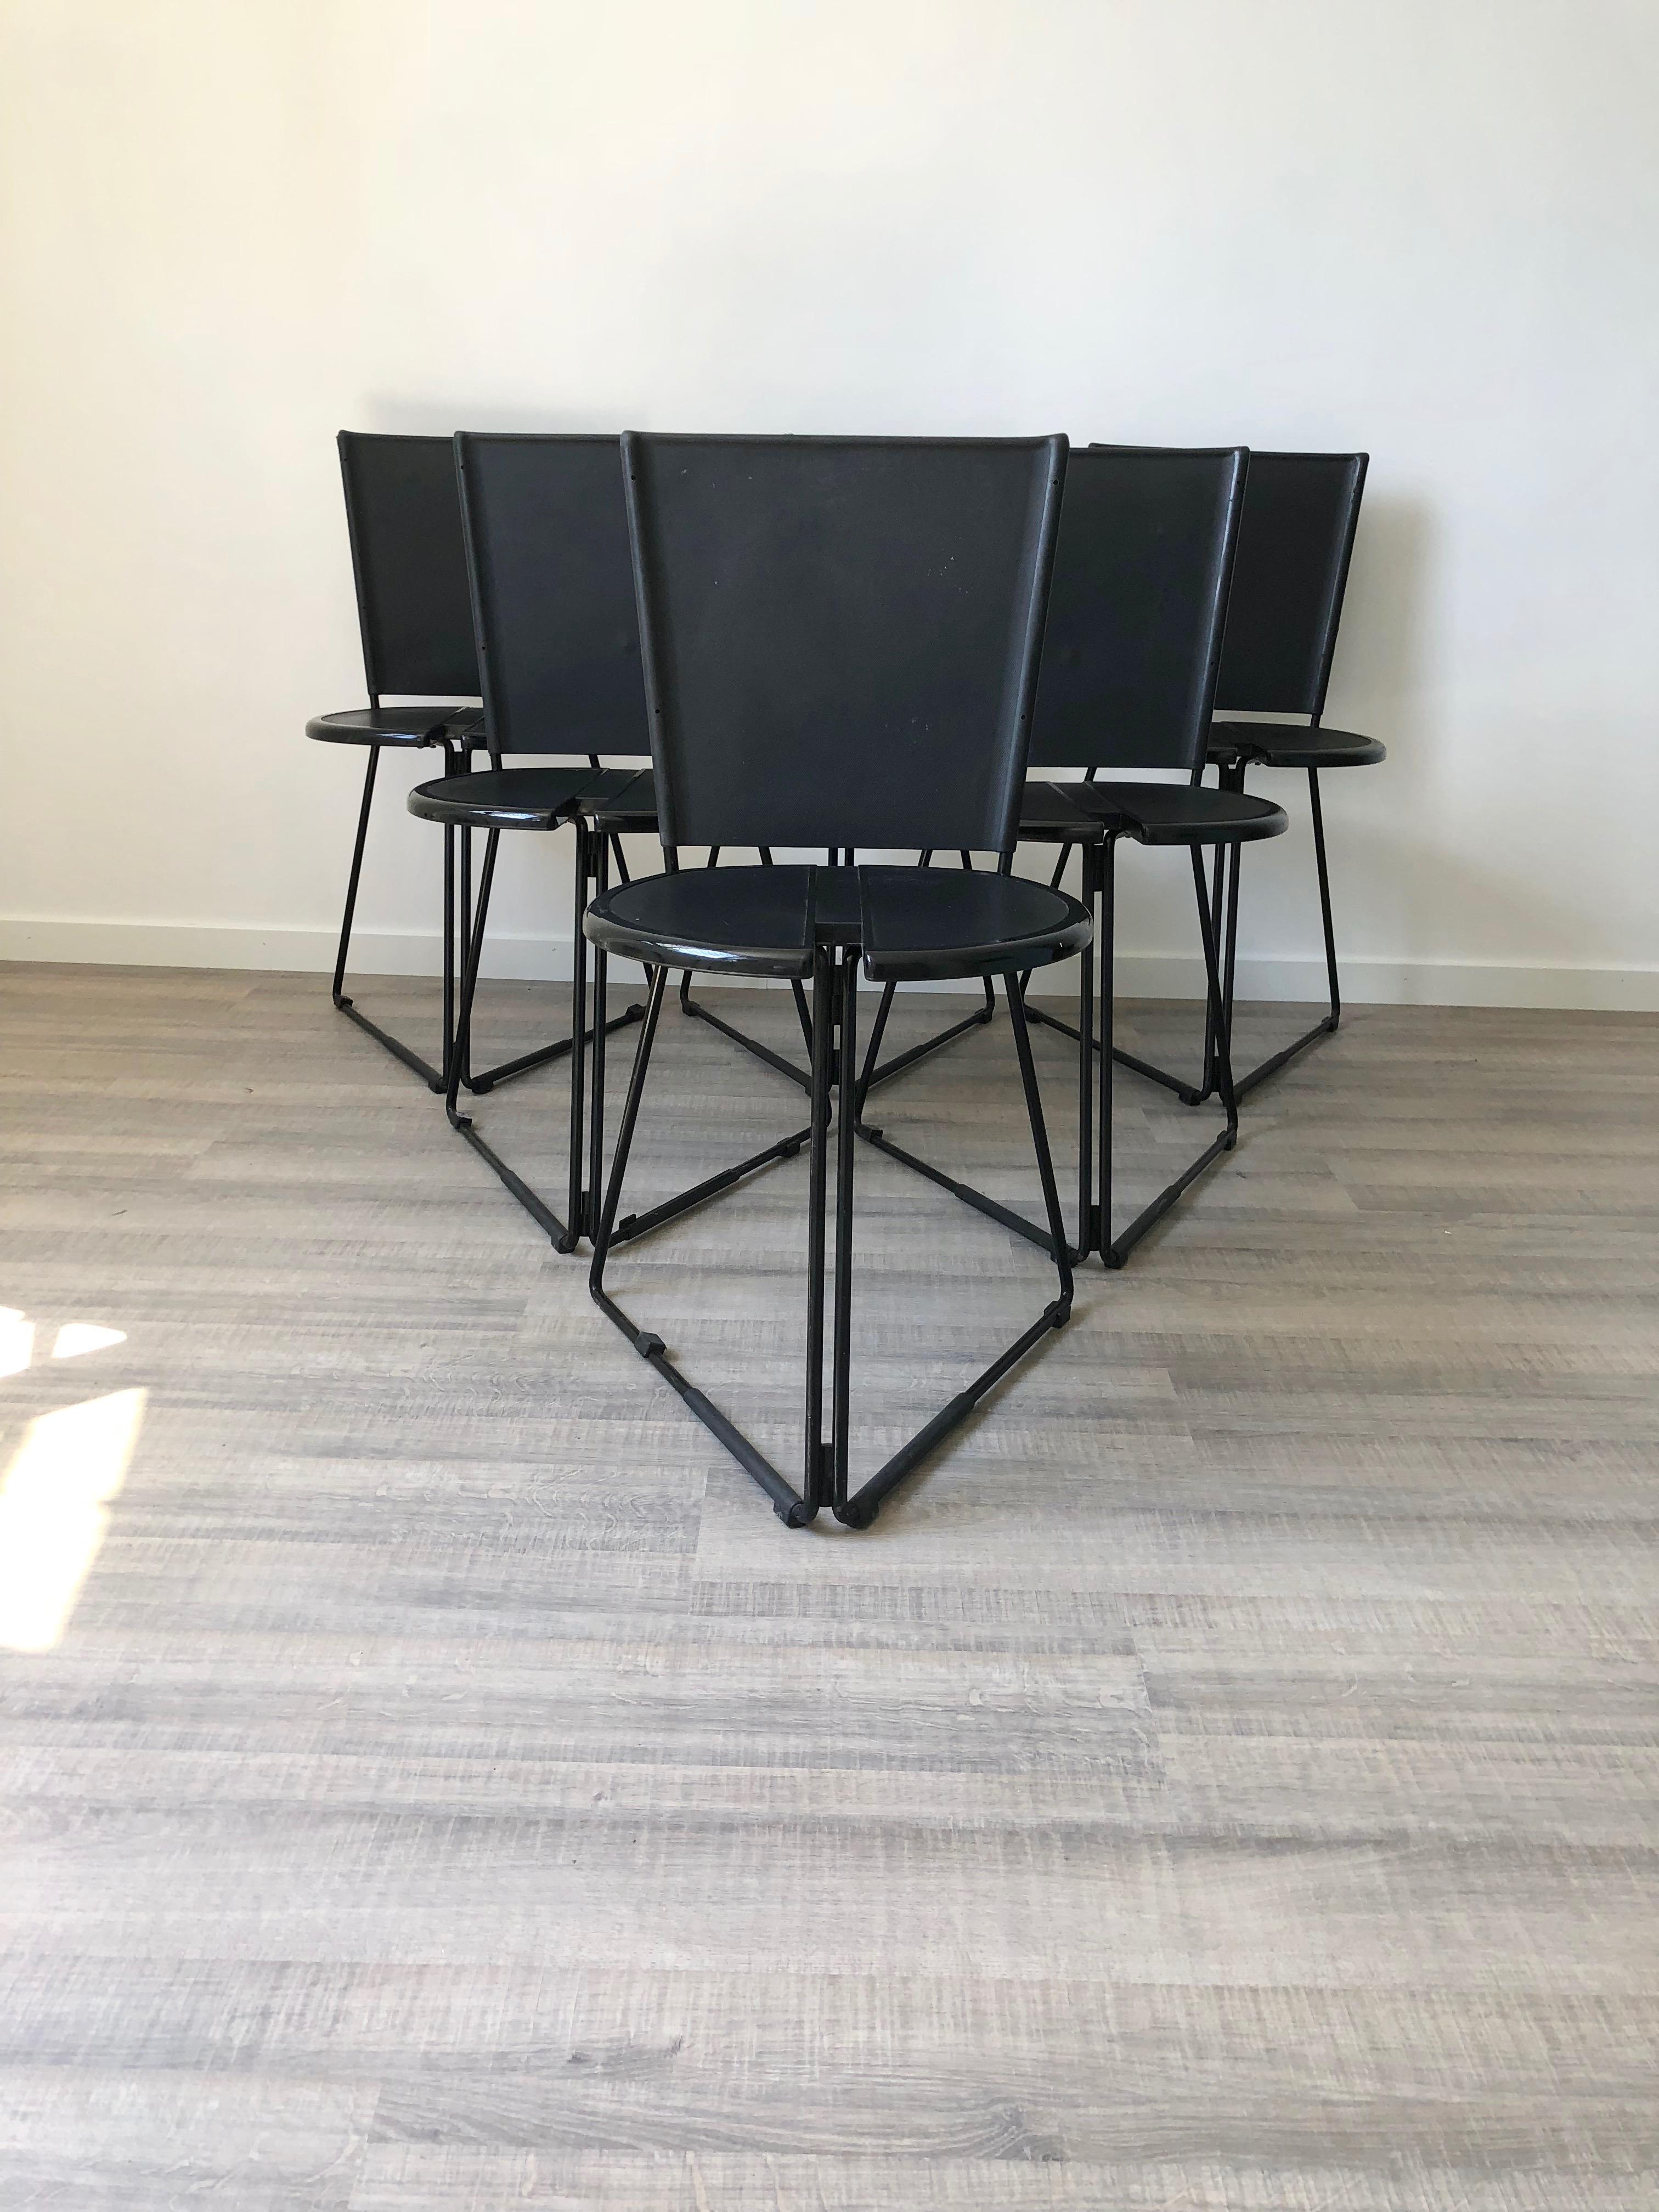 A set of six chairs that feature metal bases with seats in hard plastic and backrests in rubber. They are foldable and stackable.